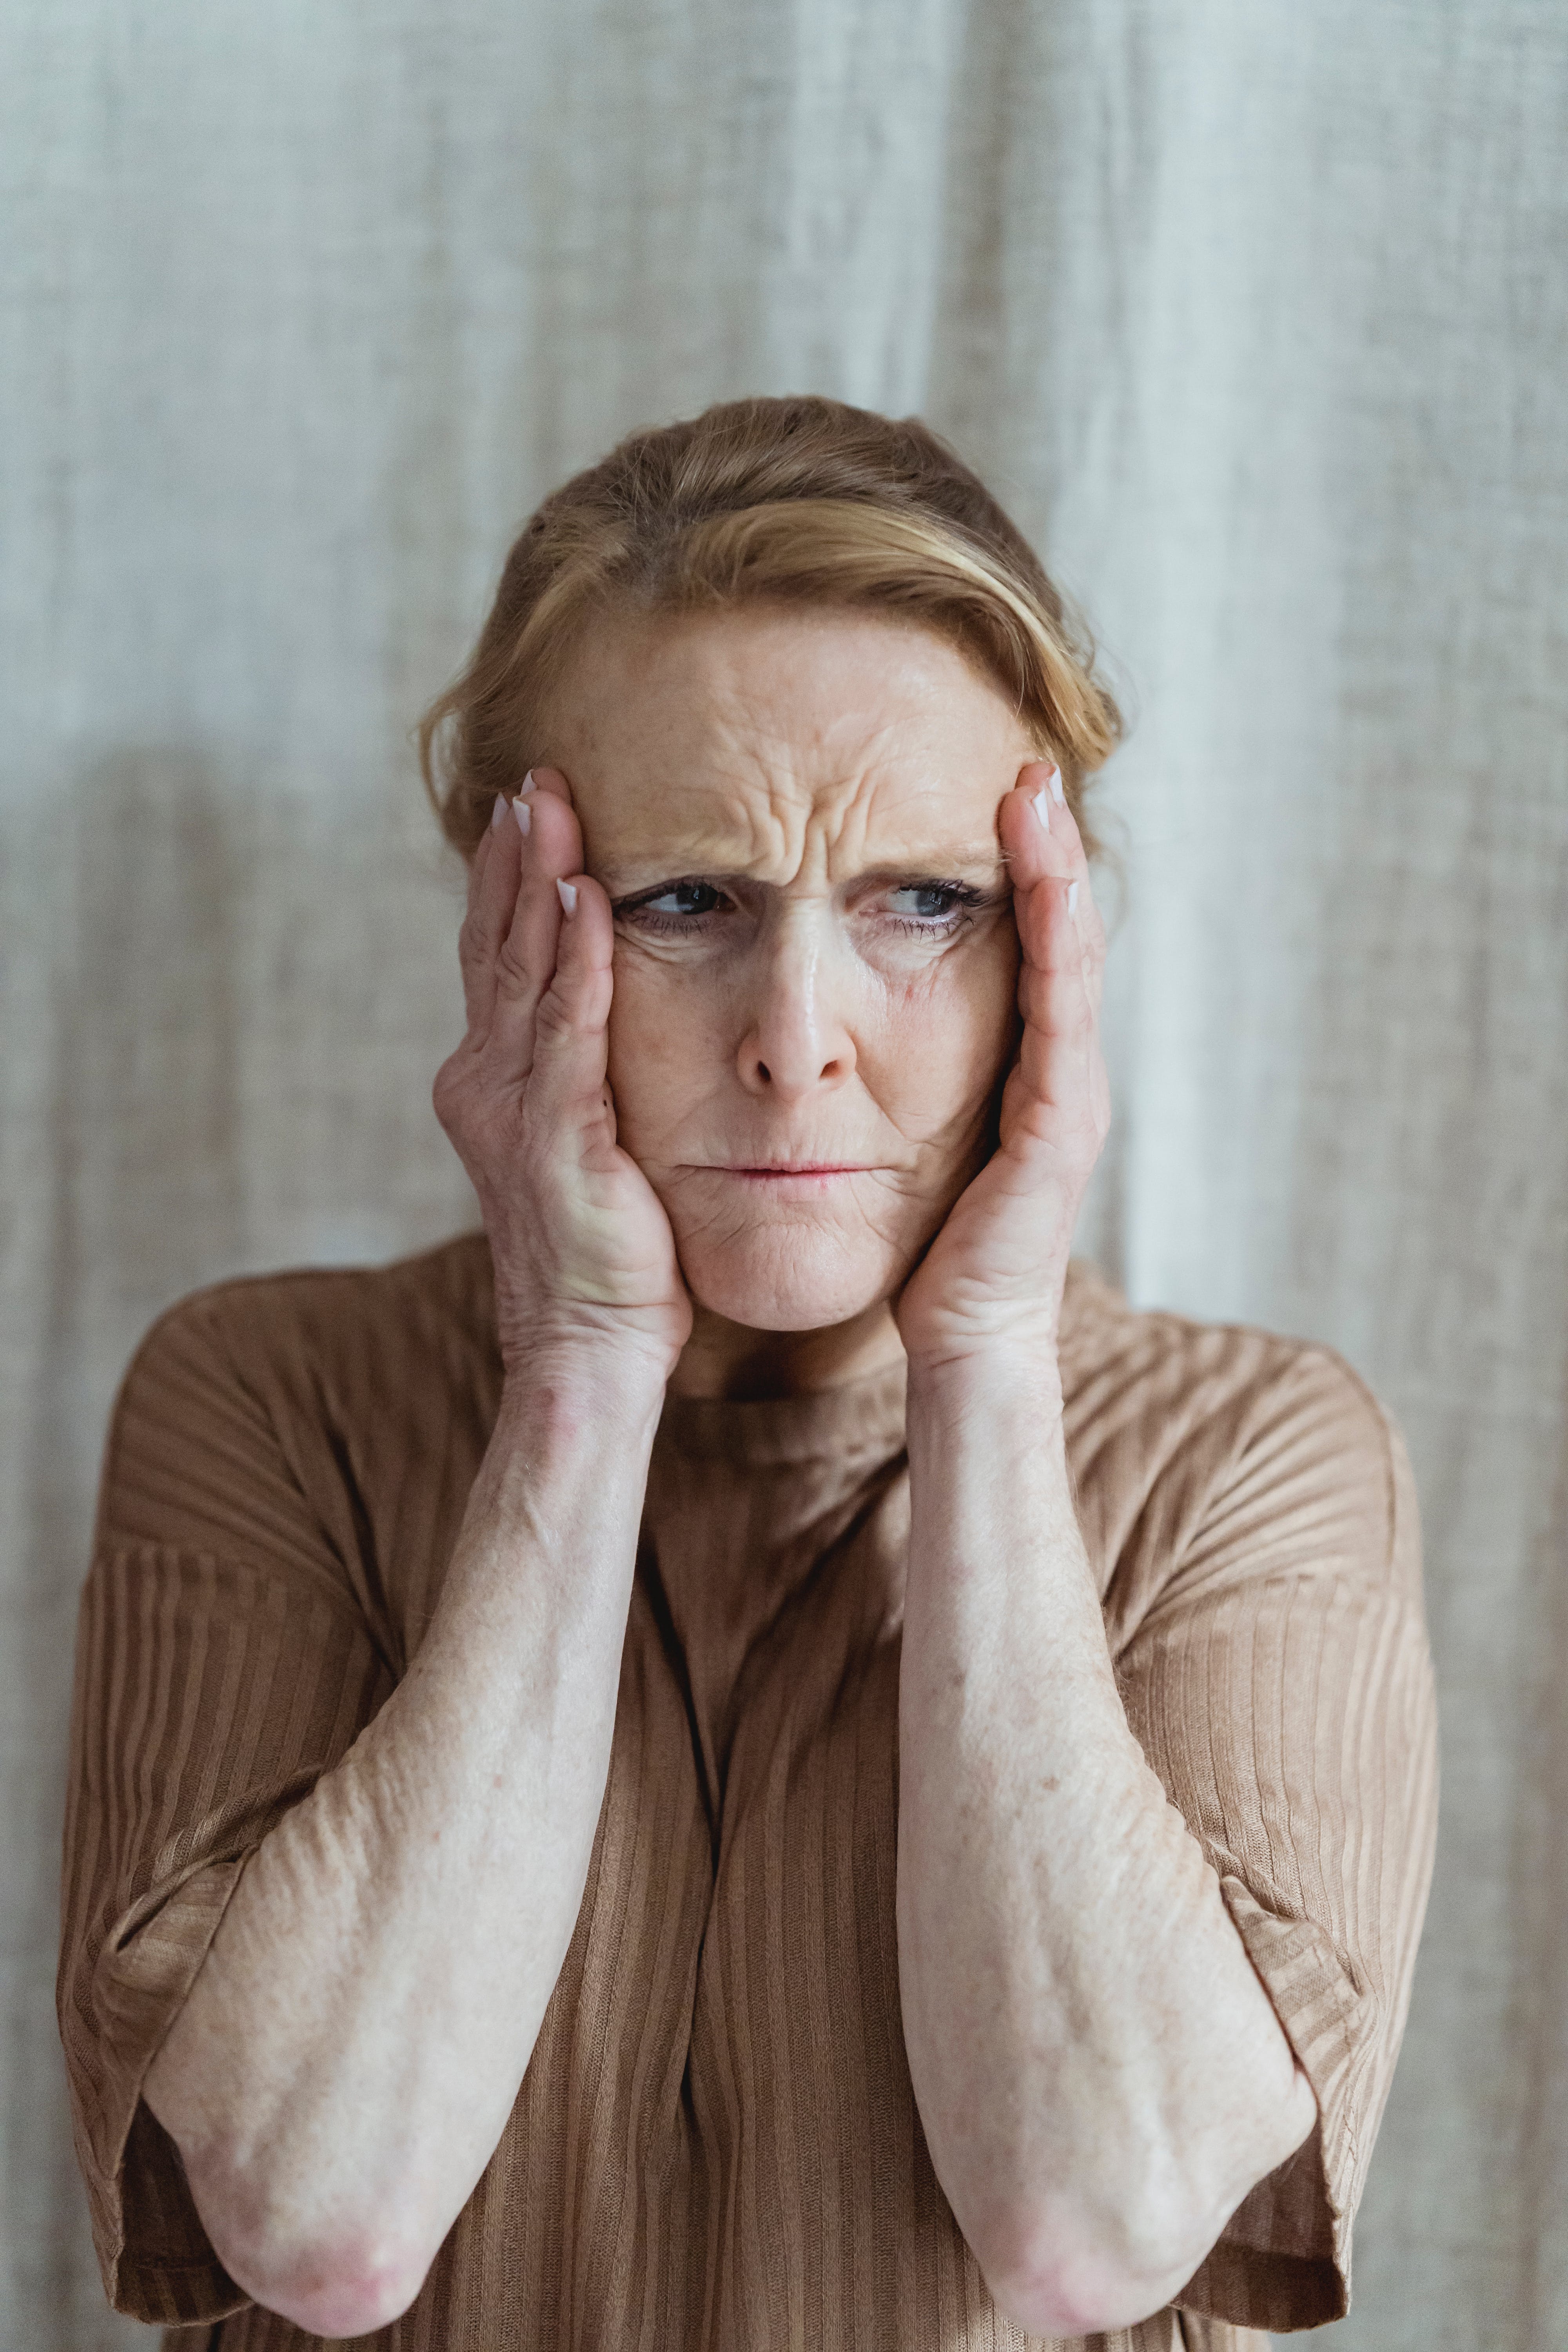 A distressed older woman holding her face with both hands | Source: Pexels